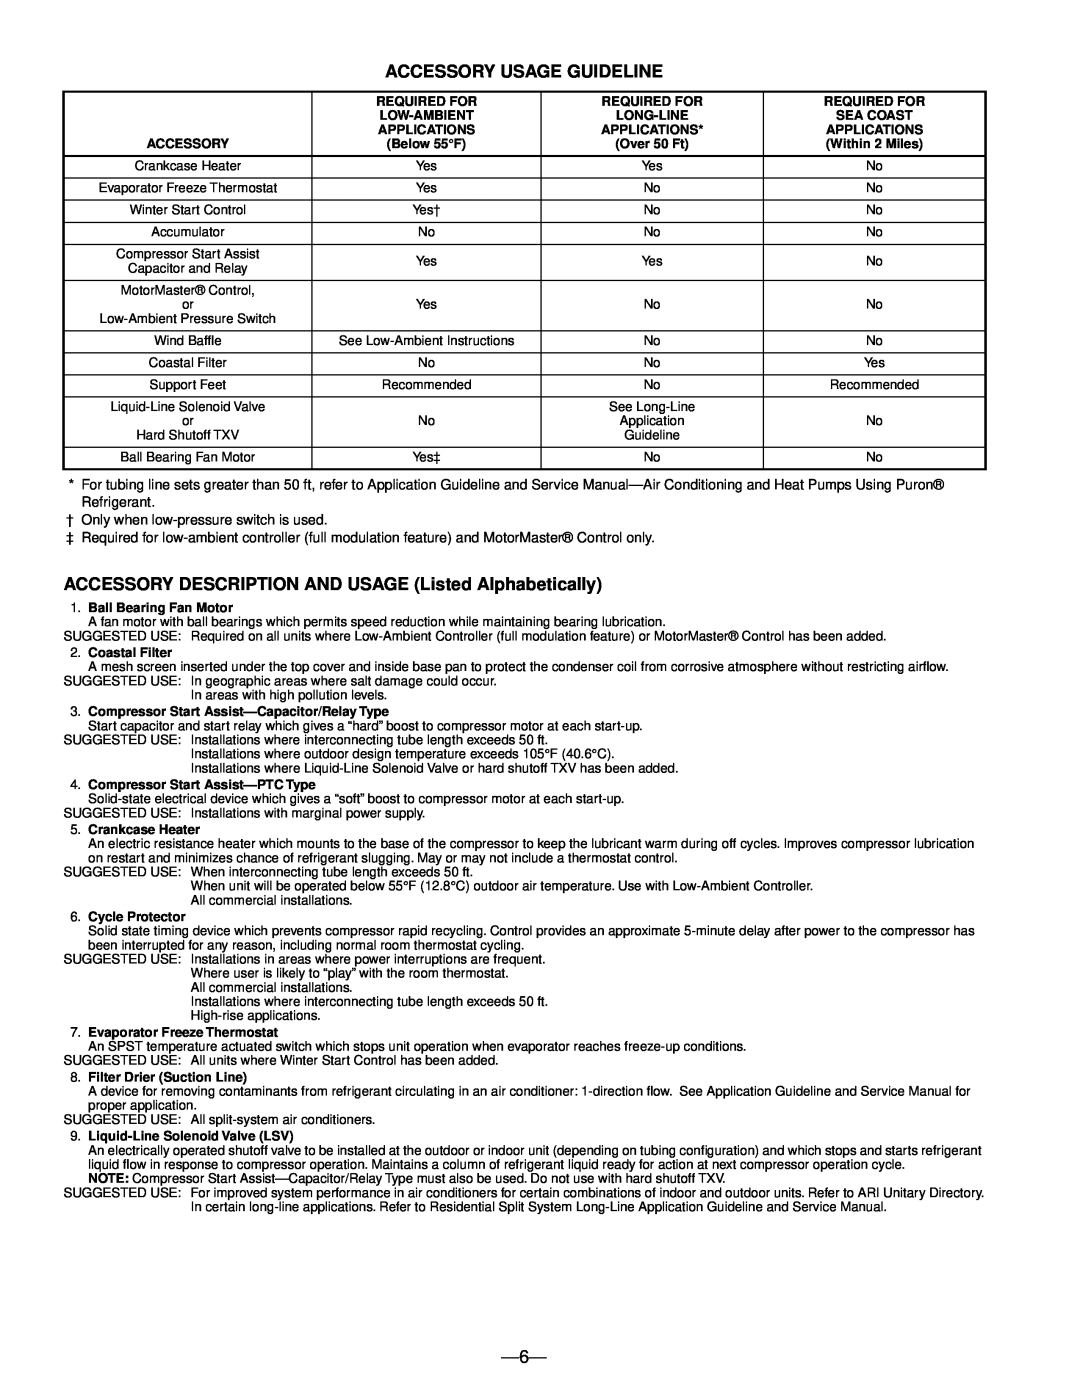 Bryant R-410A warranty Accessory Usage Guideline, ACCESSORY DESCRIPTION AND USAGE Listed Alphabetically 